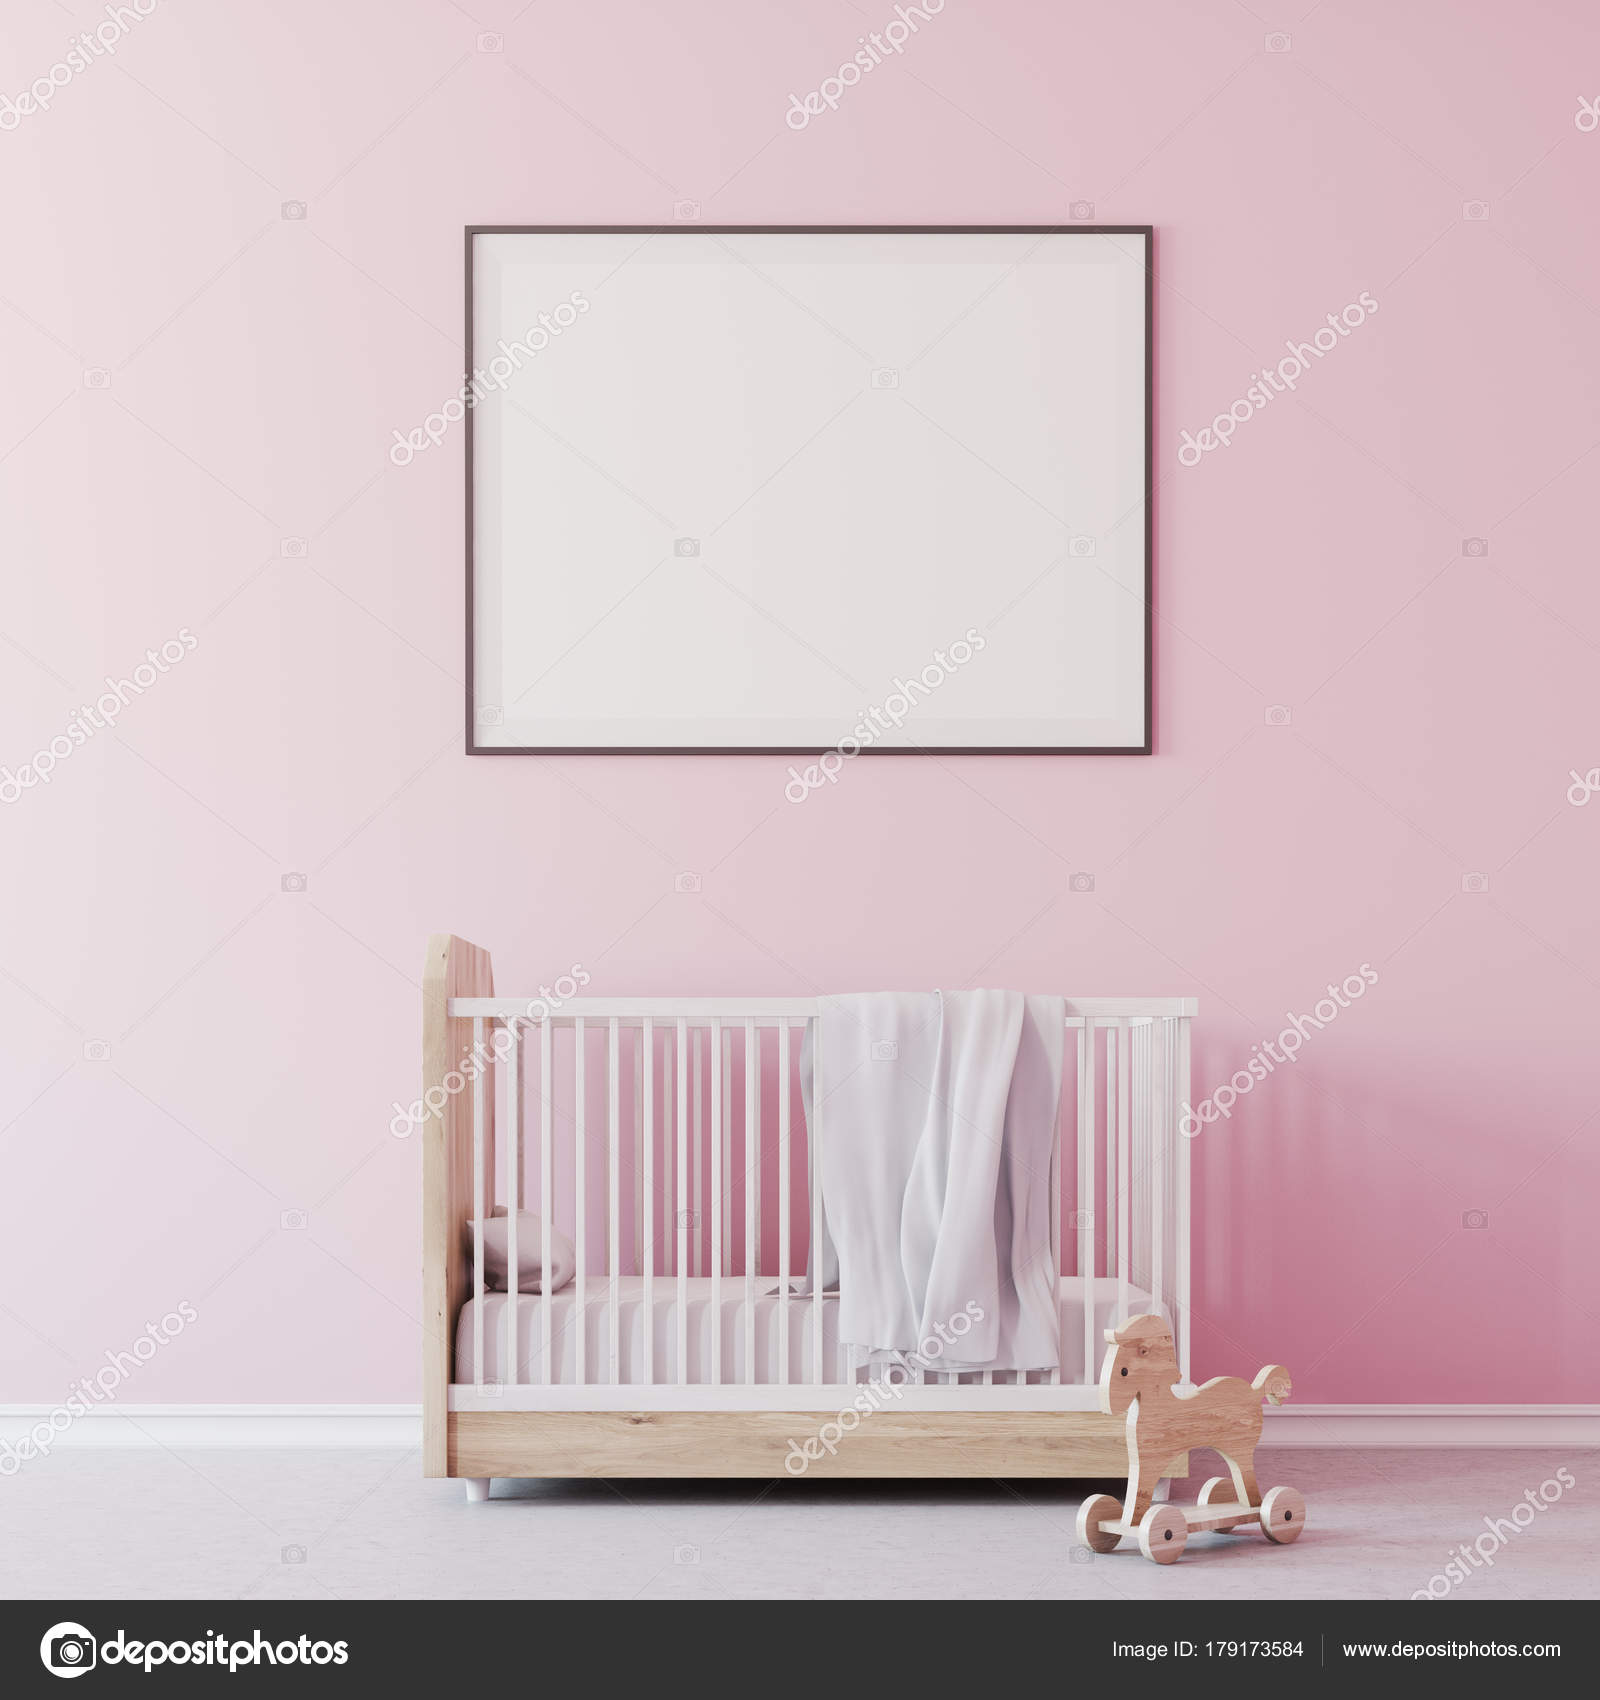 cradle for baby girl